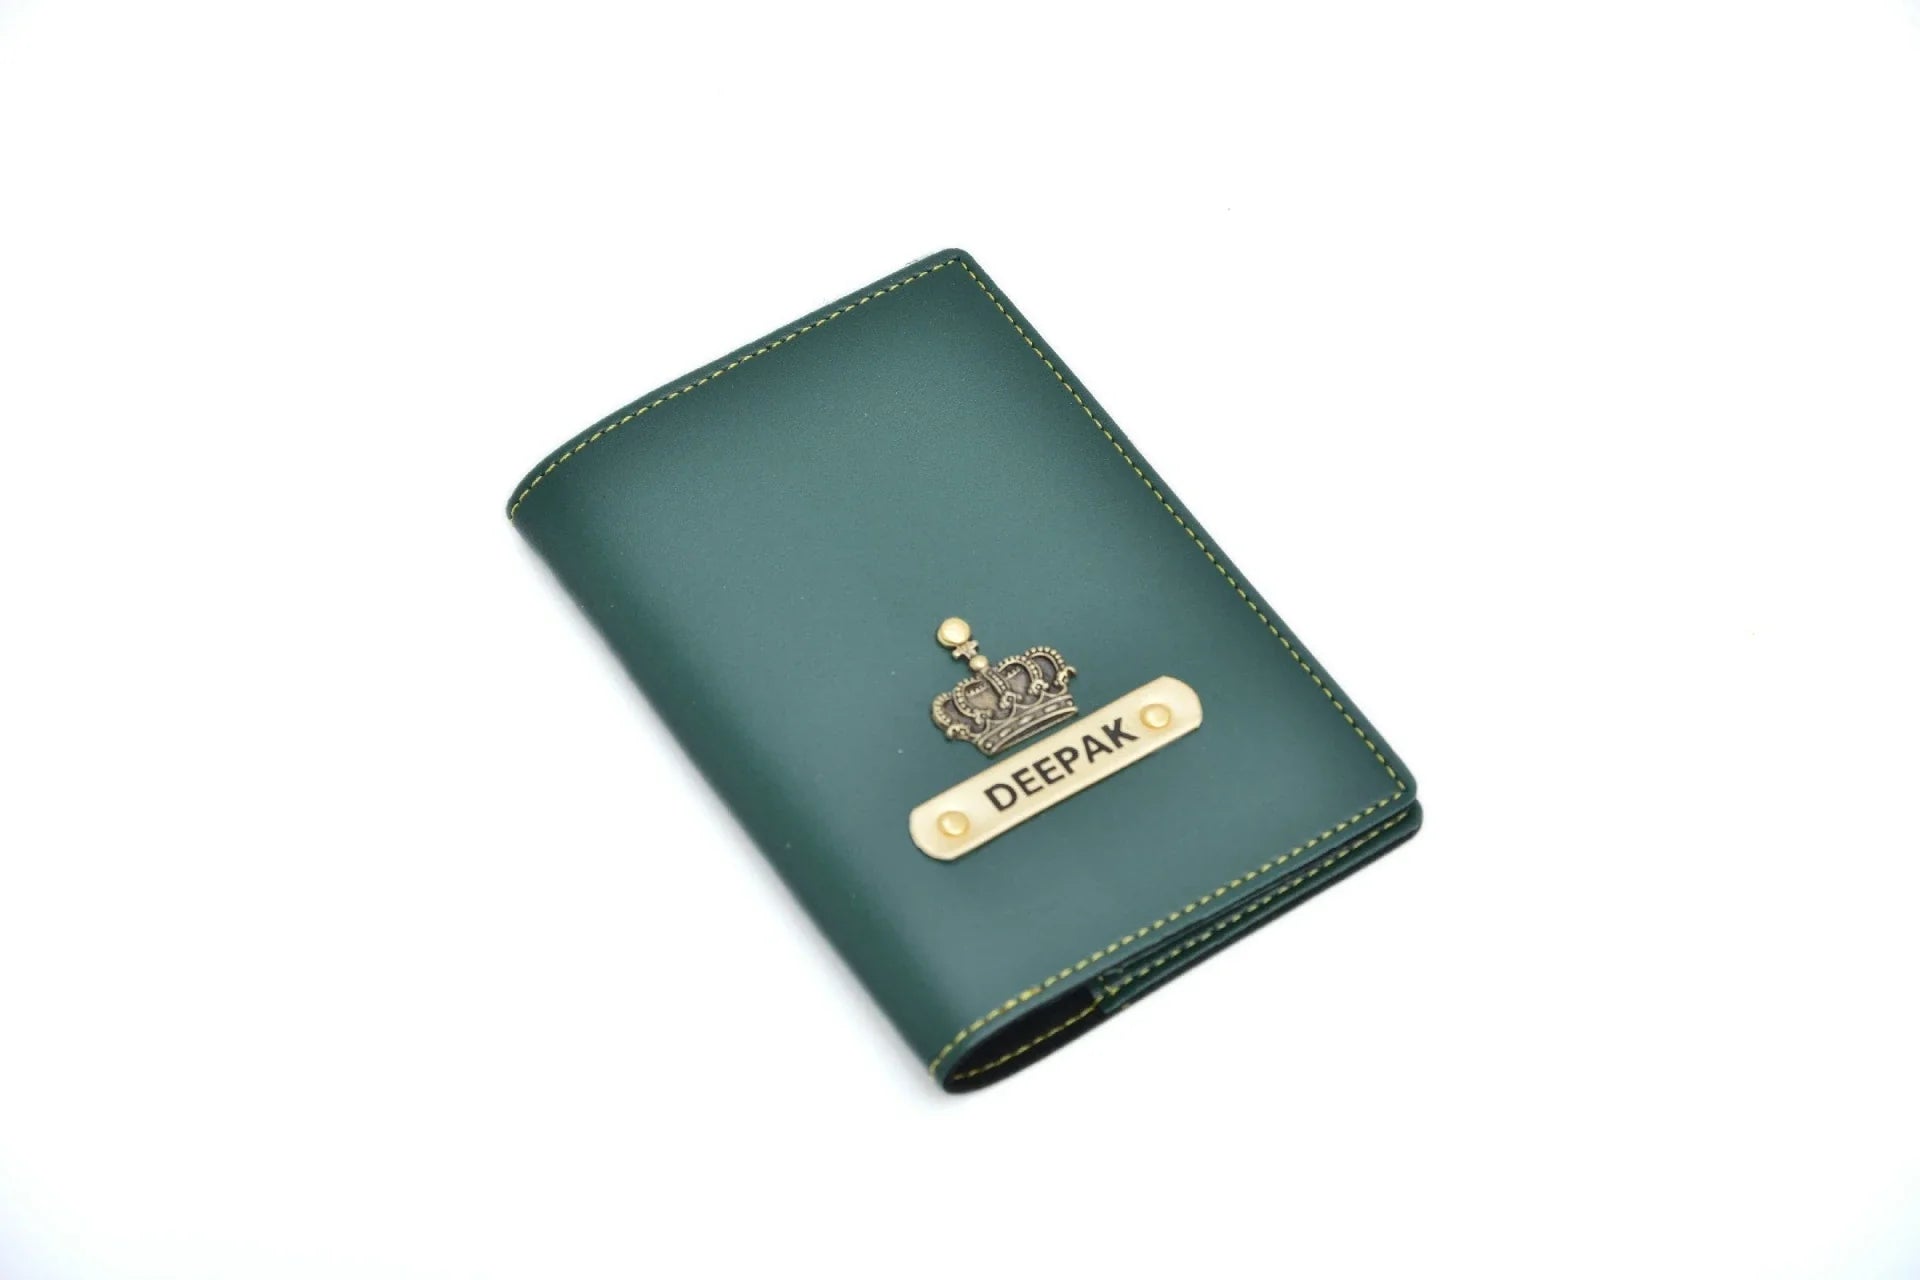 Presenting your custom-made leather passport cover with a splendid finish that makes your passport stand out! 